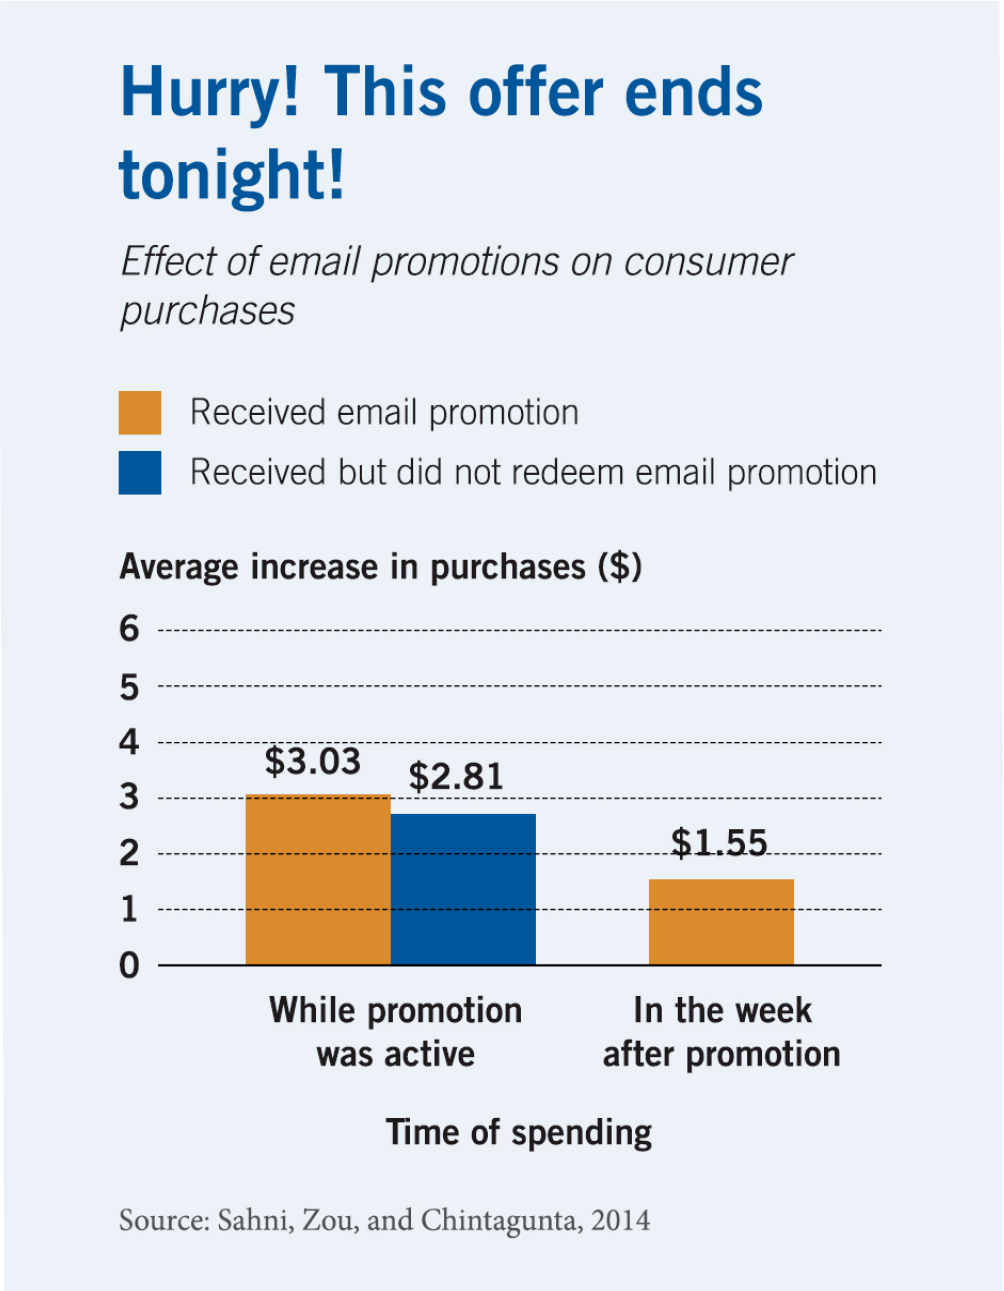 A bar chart shows that consumers who received an email promotion increased their purchases by an average of three dollars and three cents while it was active, while the subset of that group who received but did not redeem the promotion spent two dollars and eight one cents more. In the week after the promotion, those who had received it increased their purchases by one dollar and fifty-five cents.